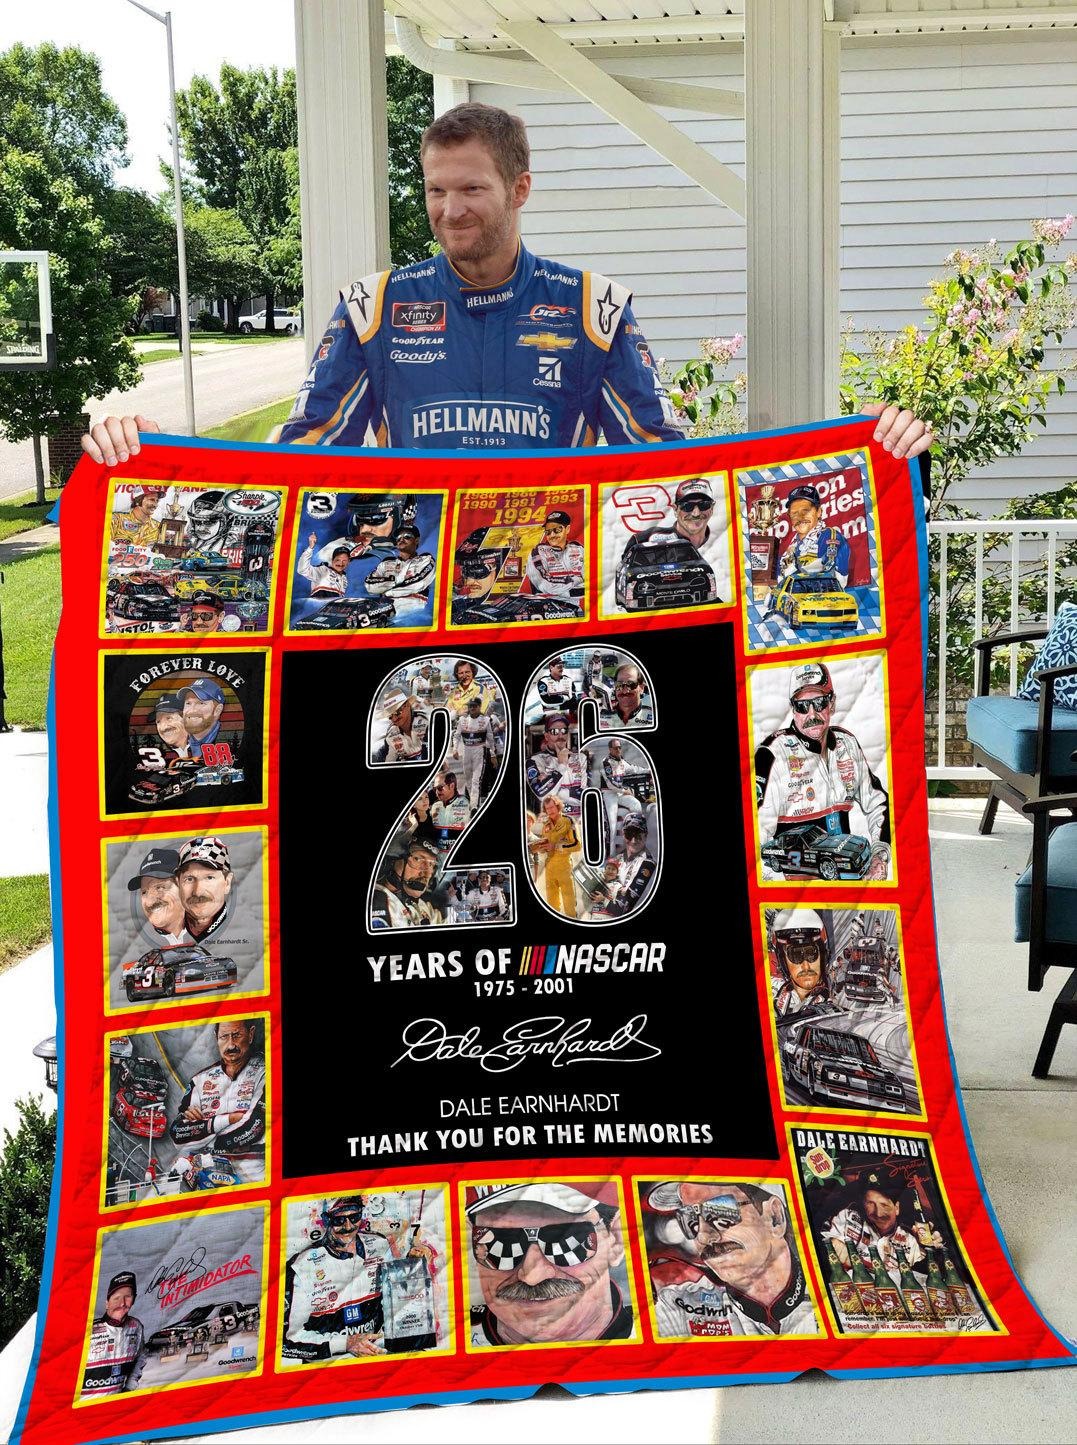 26 years of Nascar Dale Earnhardt quilt